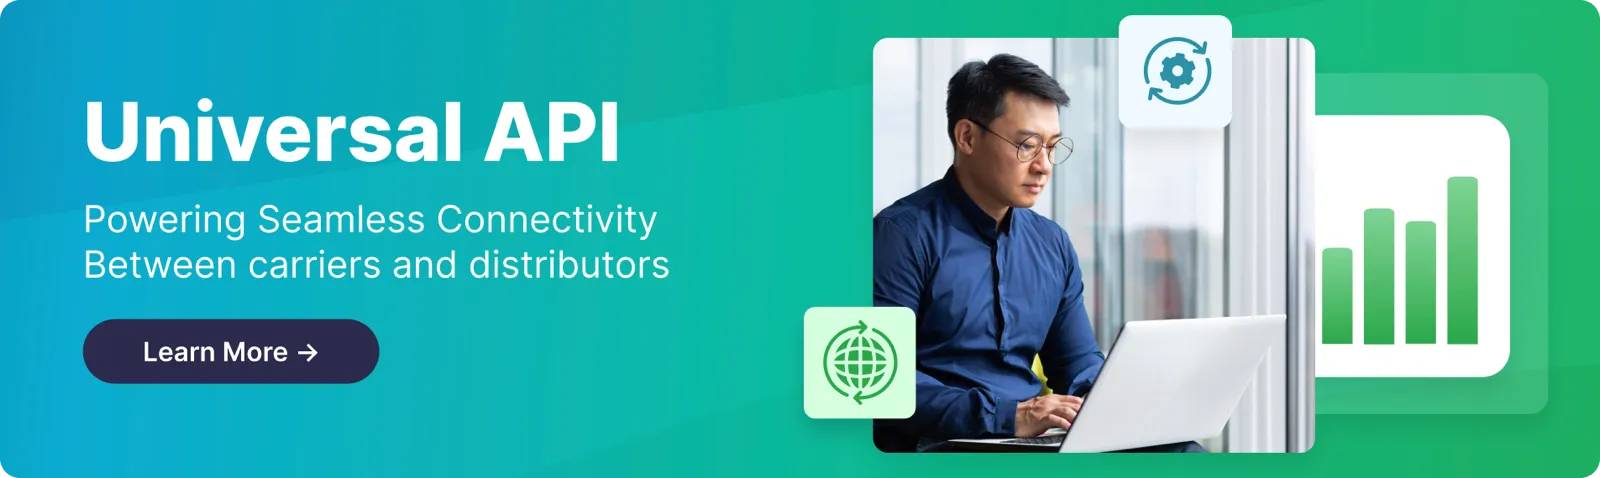 Learn more about iLife Universal API